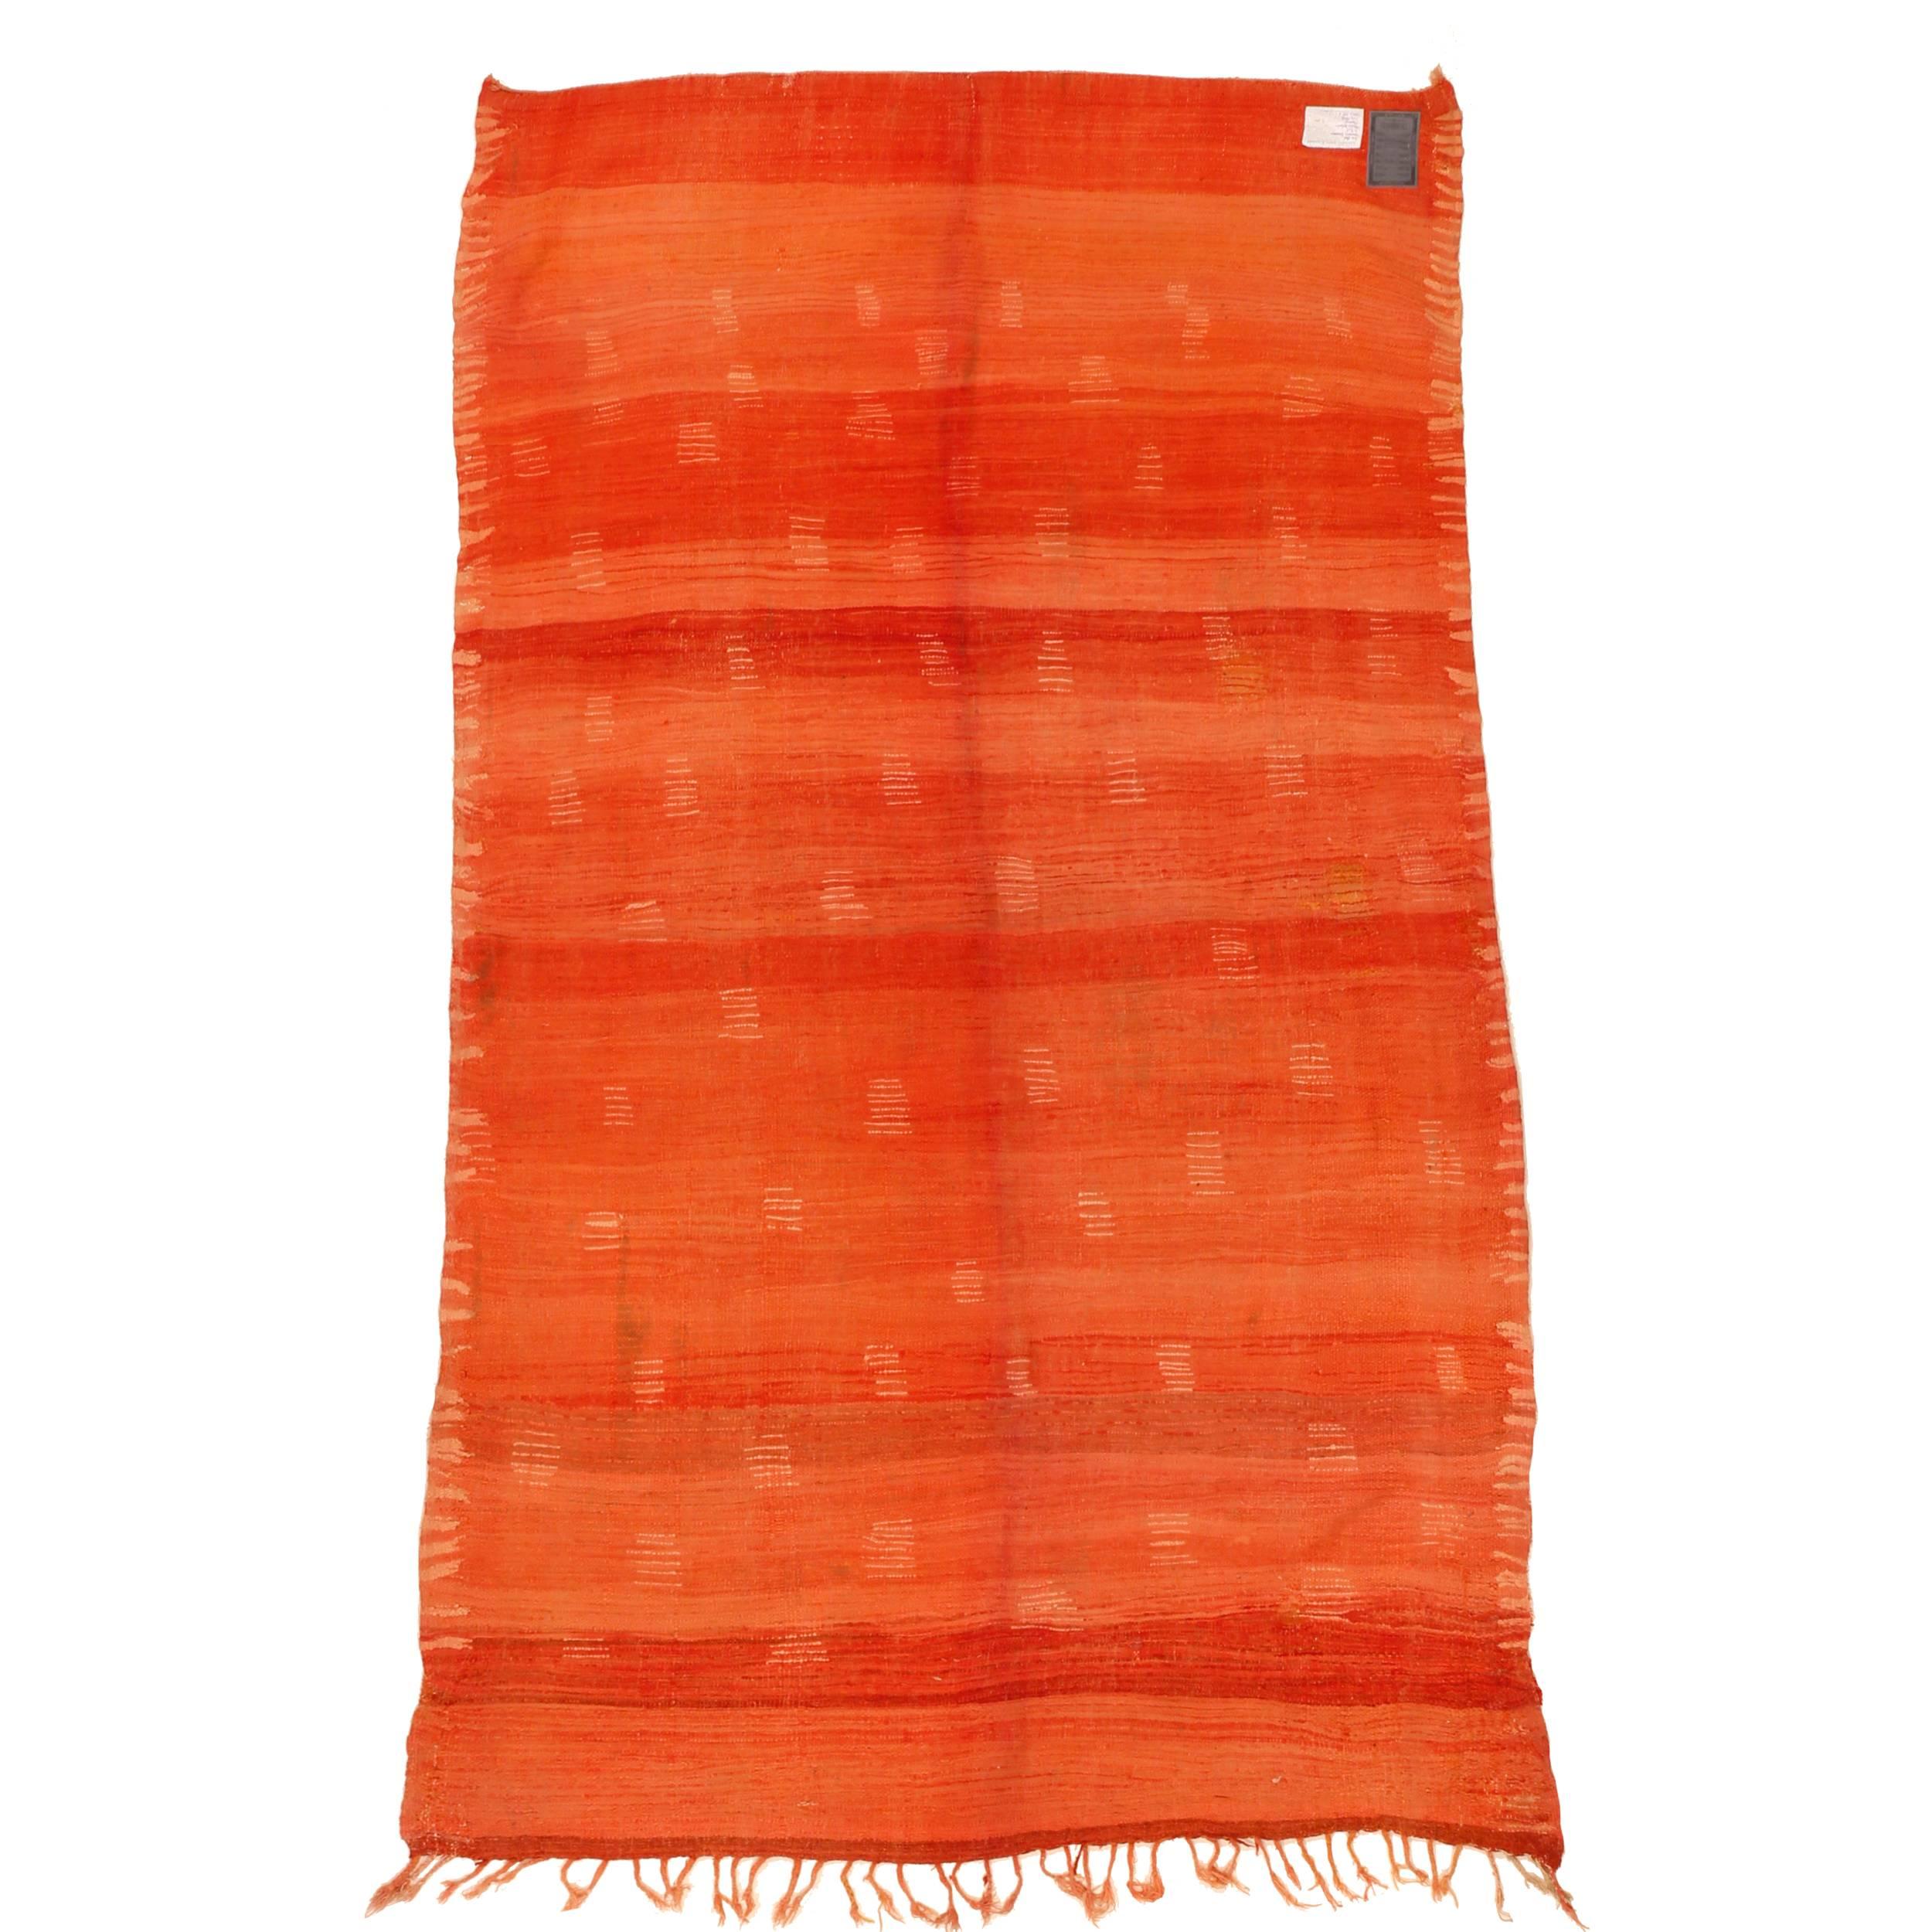 A magnificent example of Rehamna weaving, originating from the plains near Marrakesh, characterized by a fluid orange-red background punctuated by ivory dots in a manner that makes it look like a stylized animal pelt. Examples of this quality are